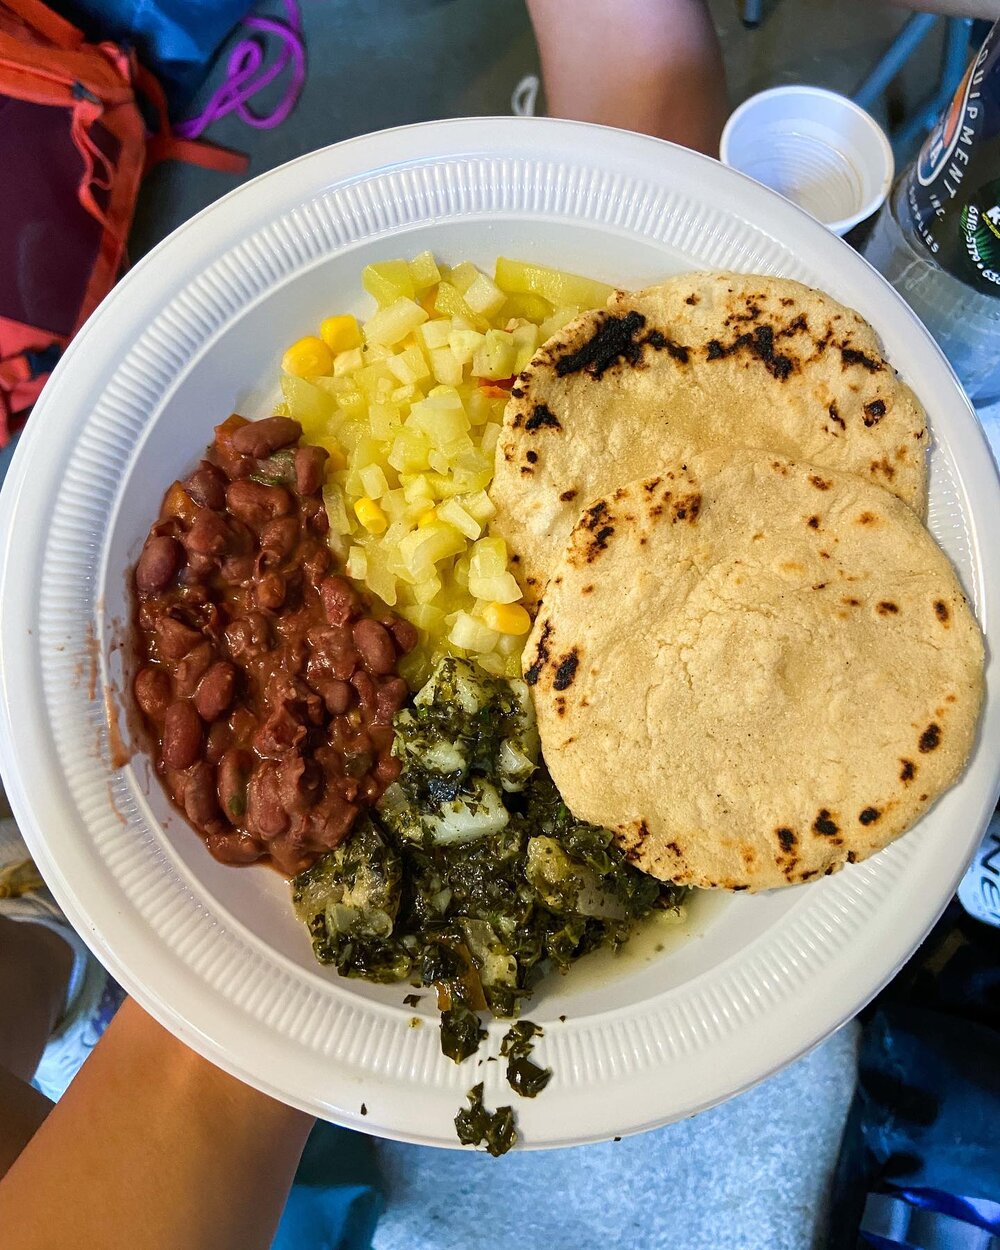 Homemade tortillas and picadillo de chicasquil (a traditional Huetares Indigenous dish)! 🌮 ⠀
⠀
Food is such an important part of cultural identity, so it was so cool to learn about a dish that holds meaning to the Huetares community&mdash;one of eig